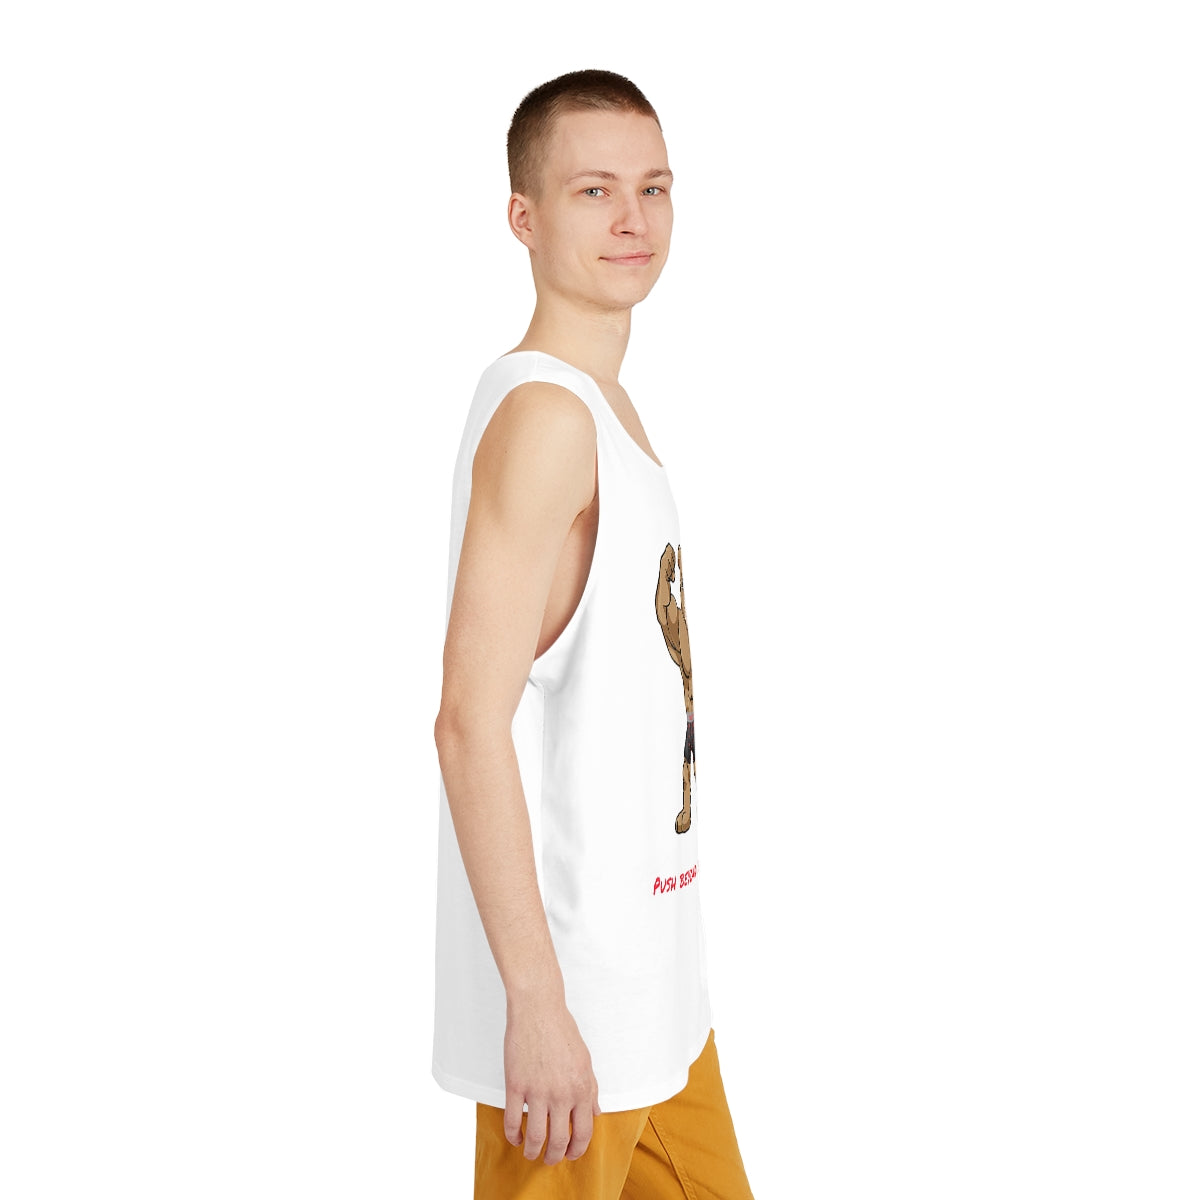 Men's All Over Print Tank - TwistedWrapper